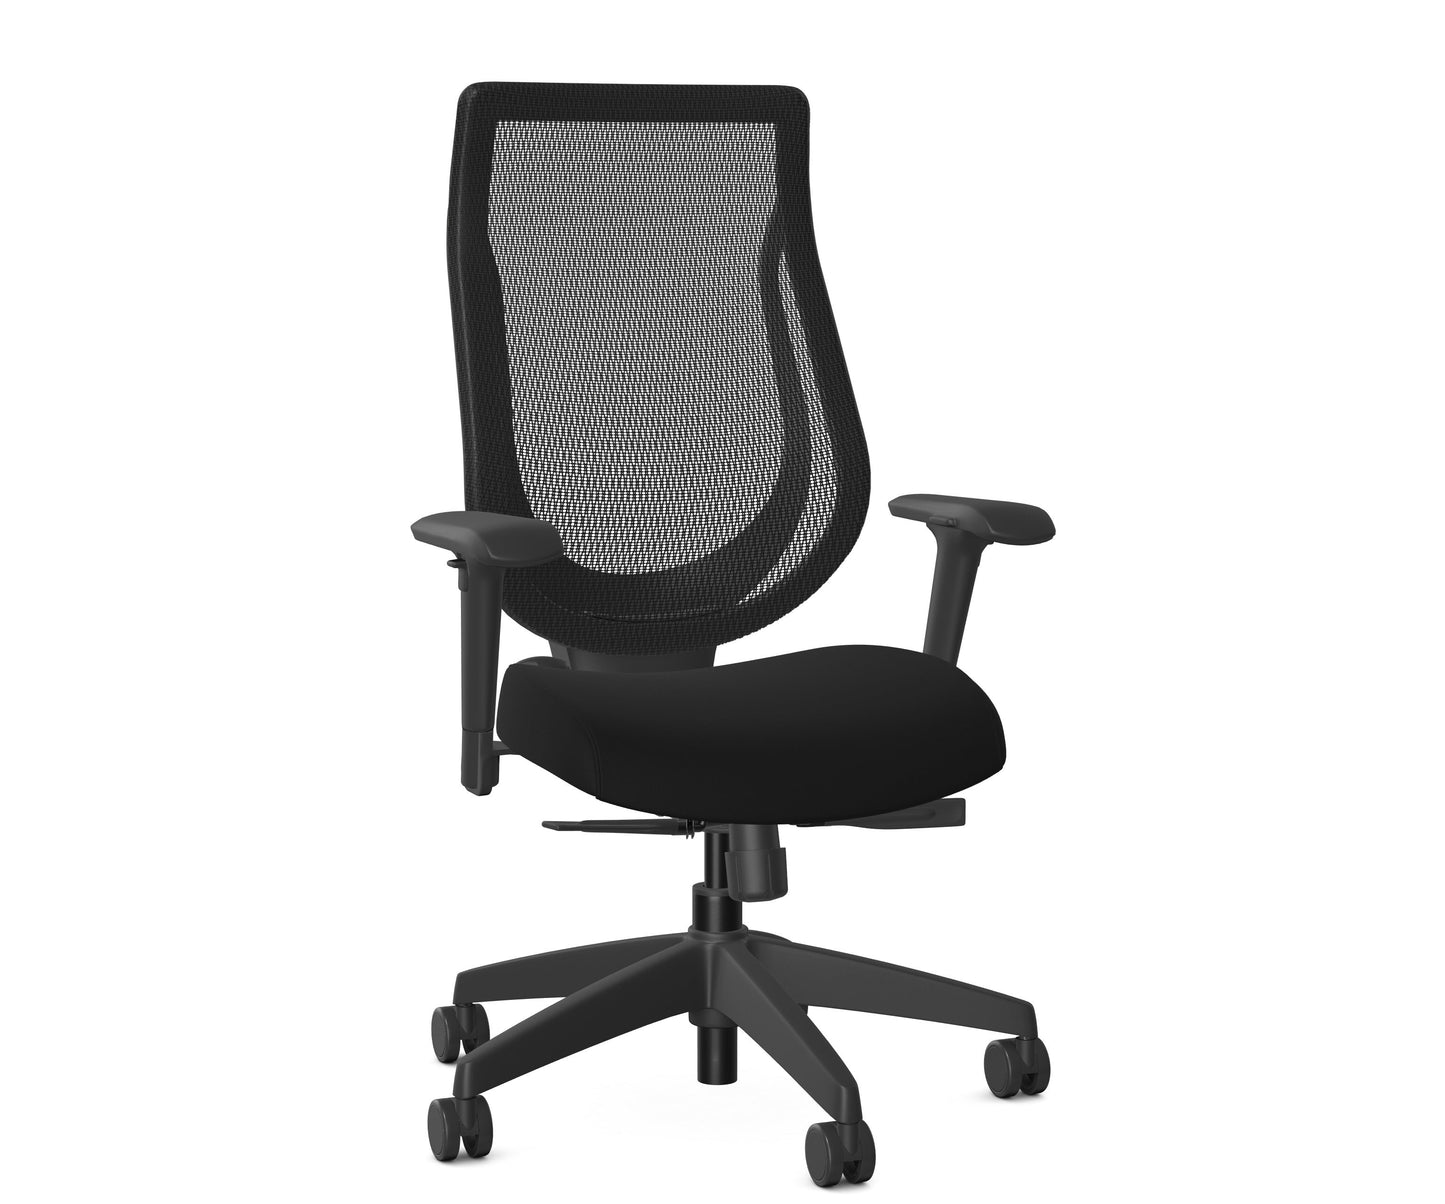 You High-Back Ergonomic Office Chair